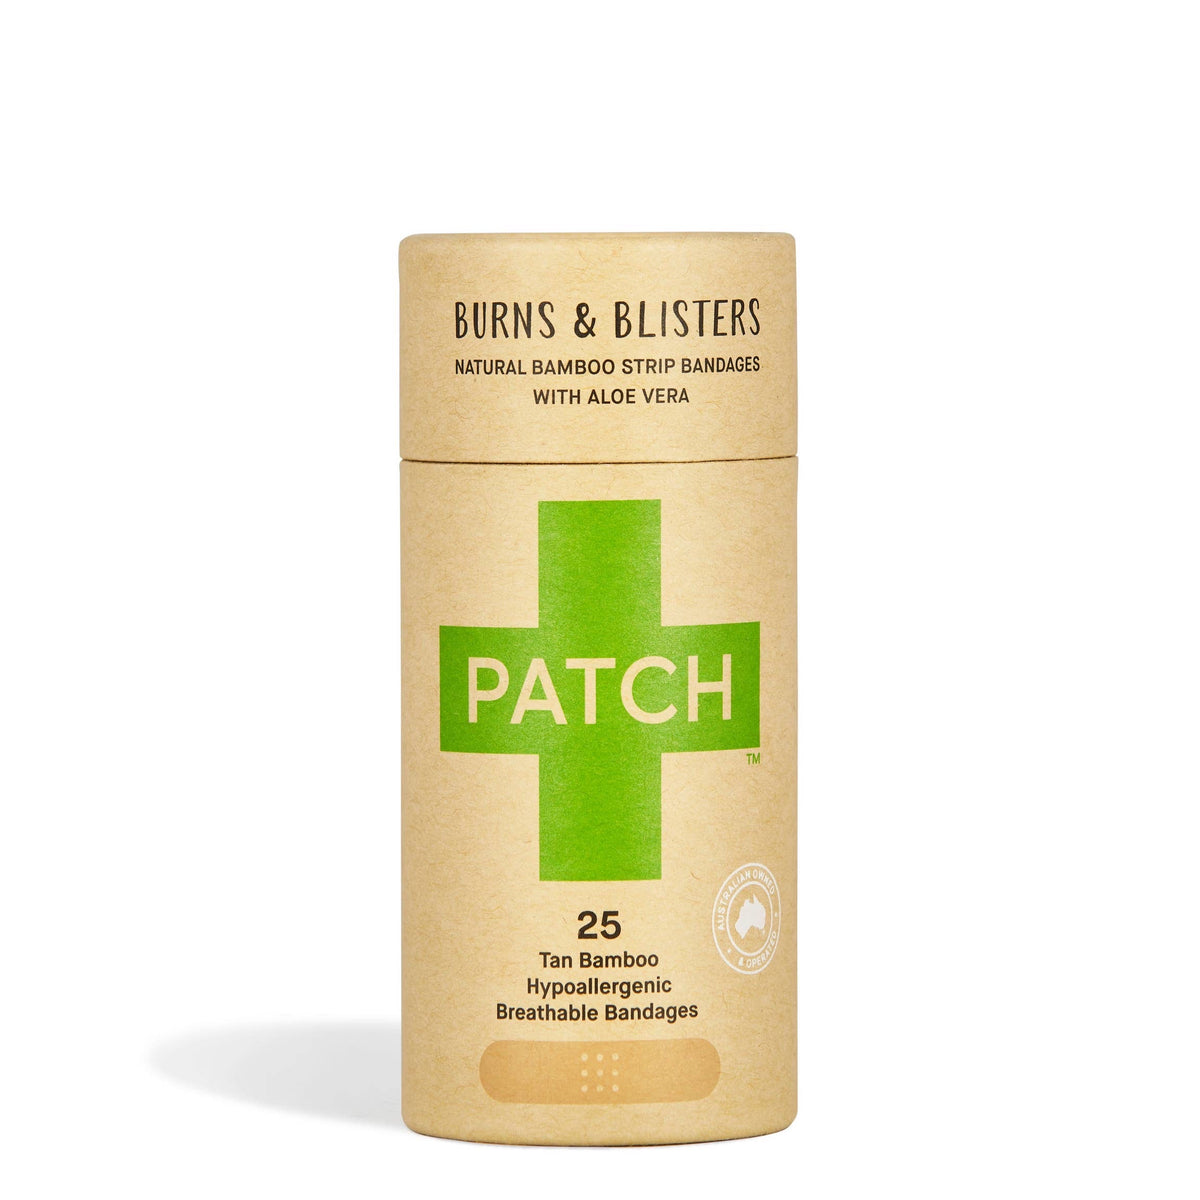 Patch Bamboo Bandages with Aloe Vera - 25 count